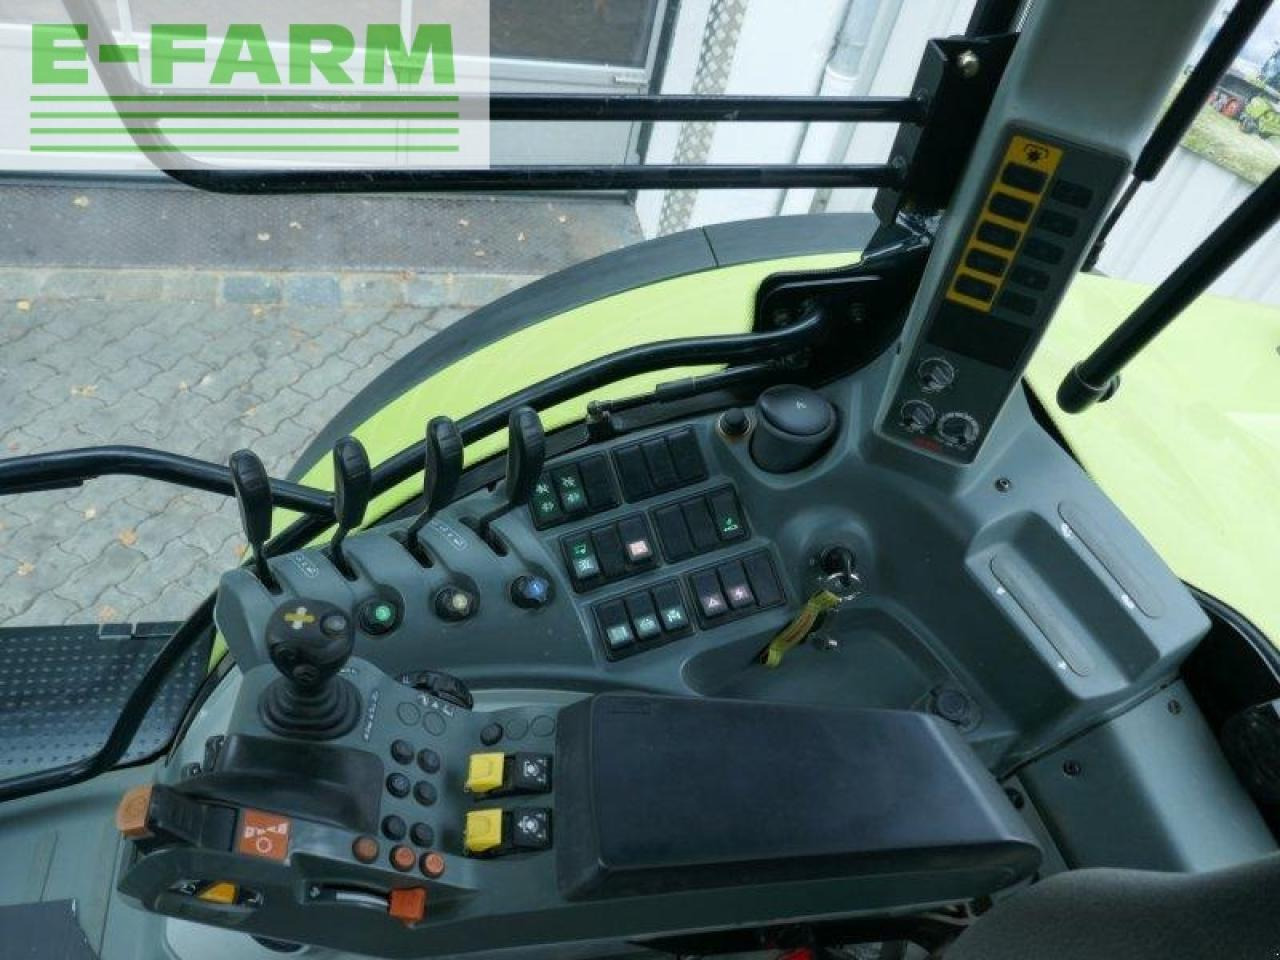 Tracteur agricole CLAAS arion 650 cis